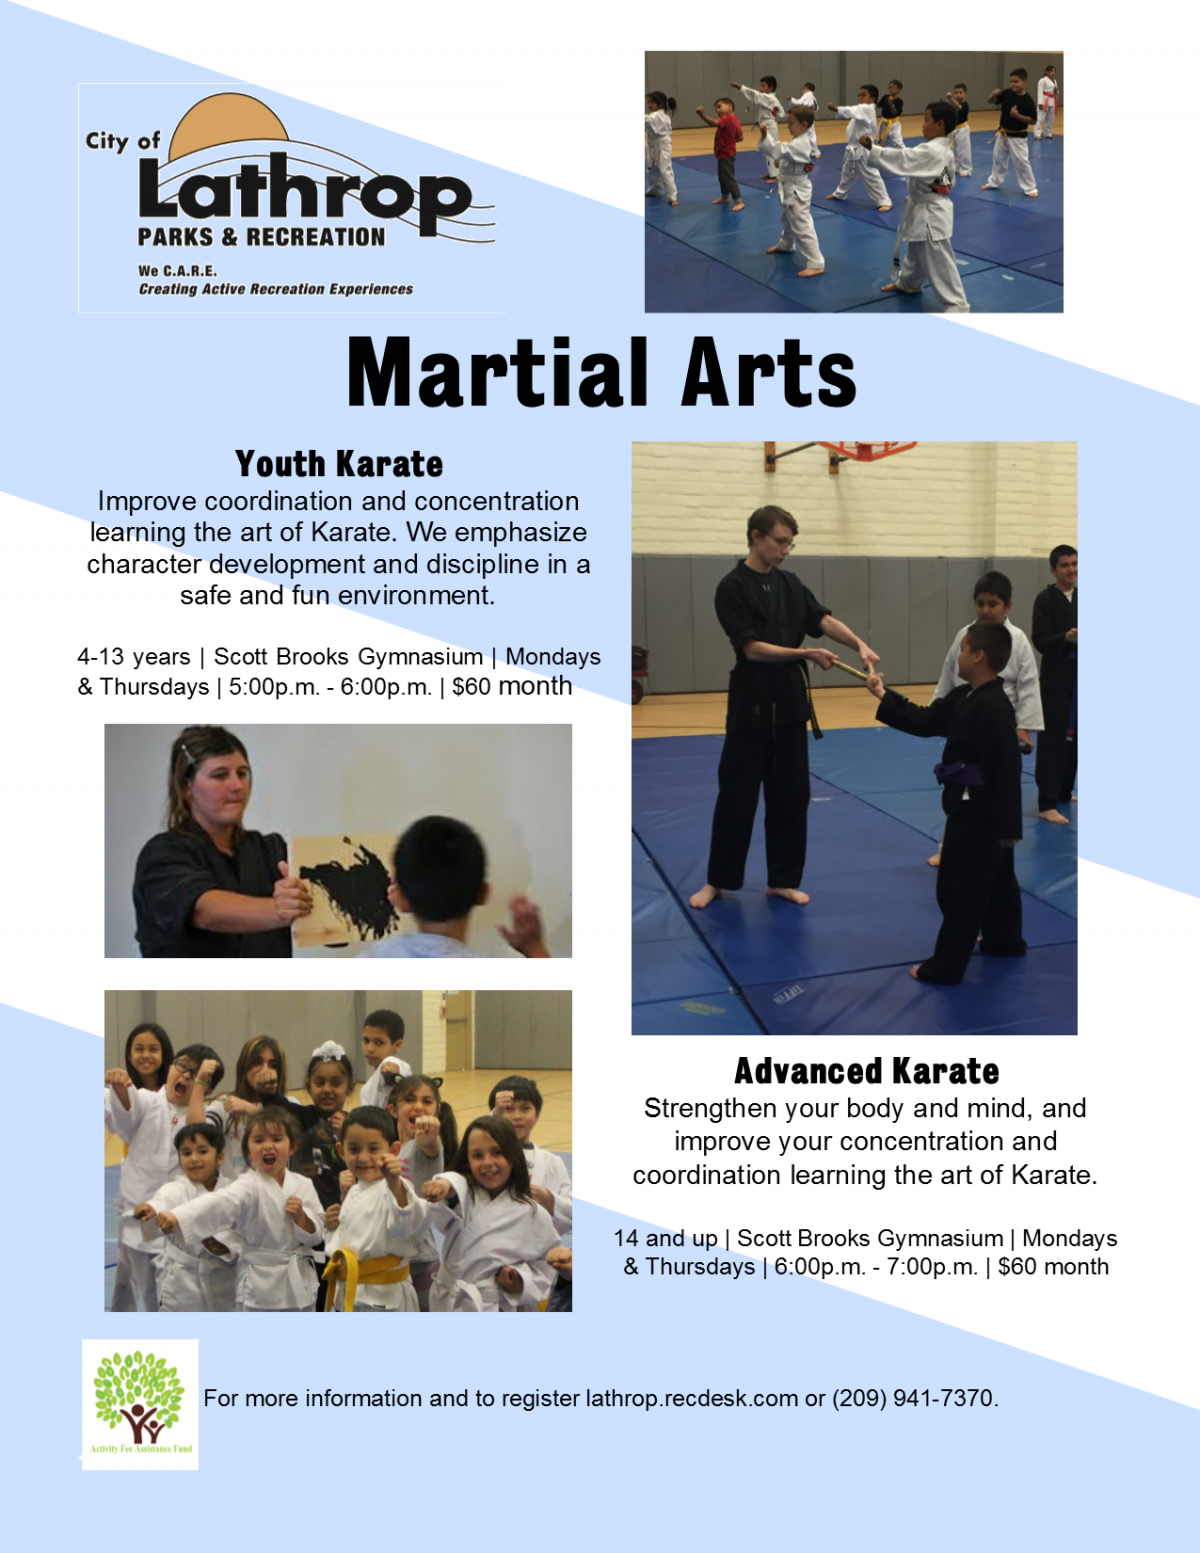 Prospect Parks and Recreation: BMA: Children's Martial Arts Classes